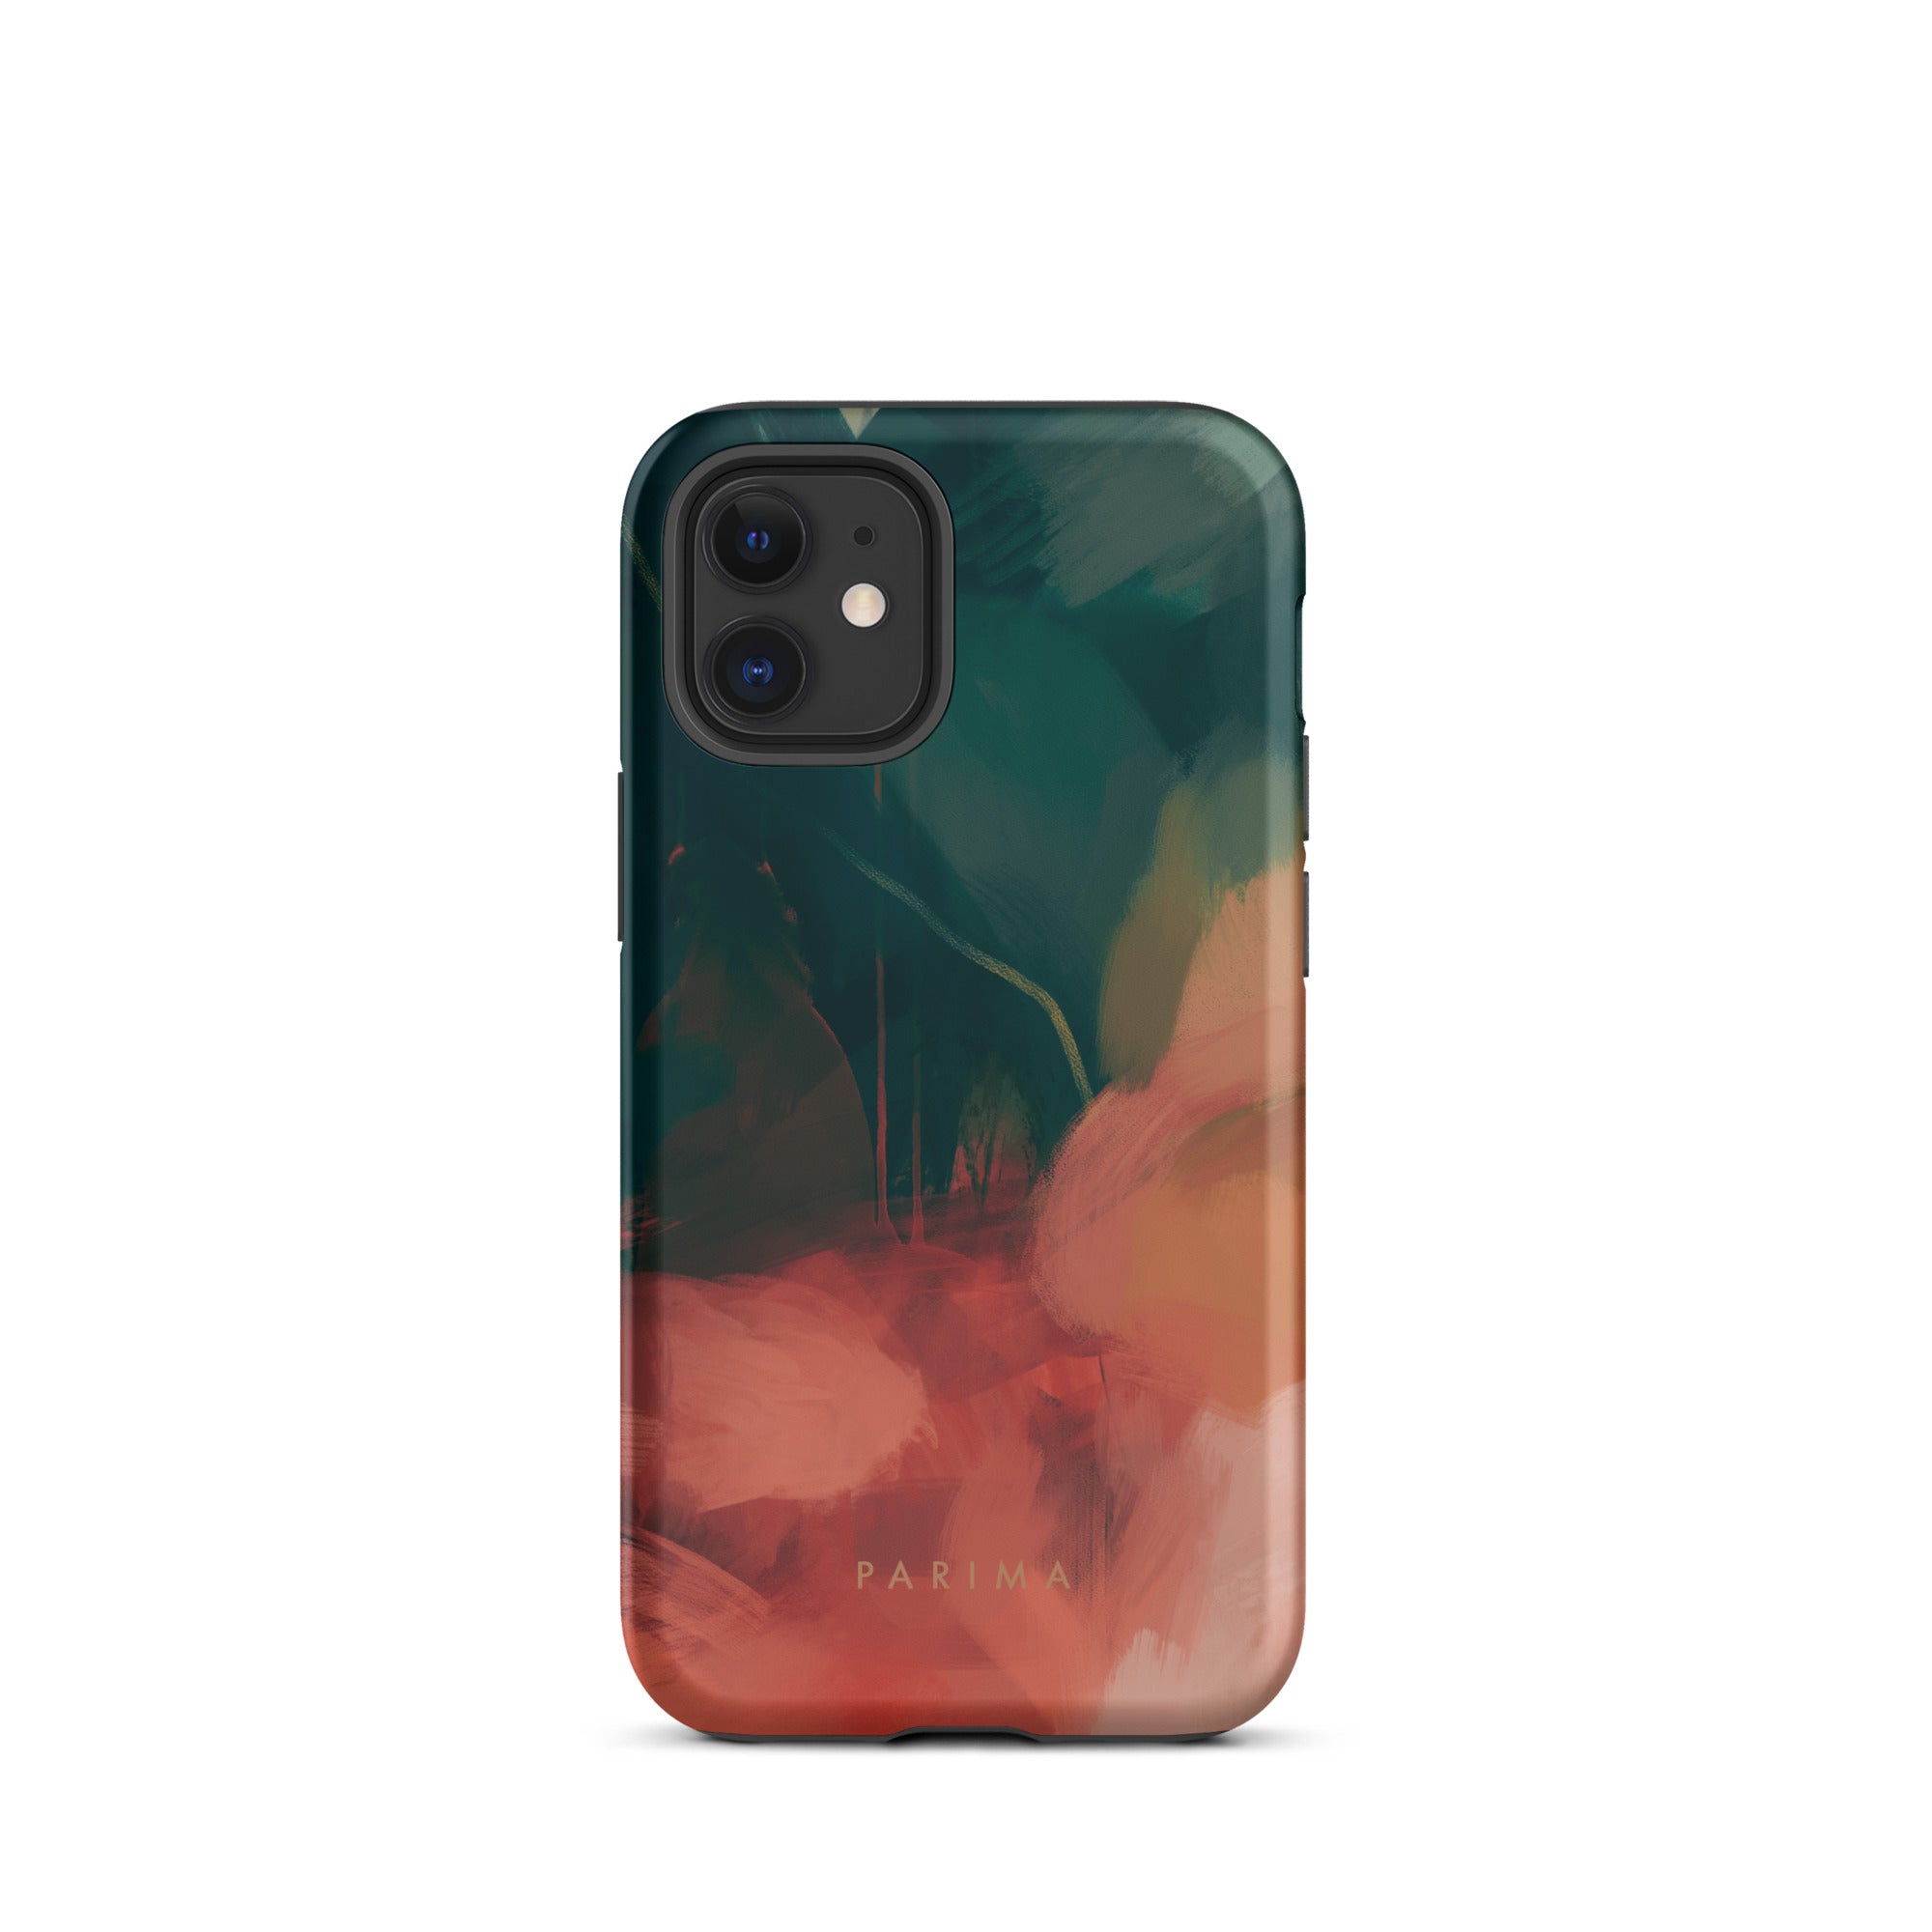 Eventide, green and red abstract art - iPhone 12 mini tough case by Parima Studio